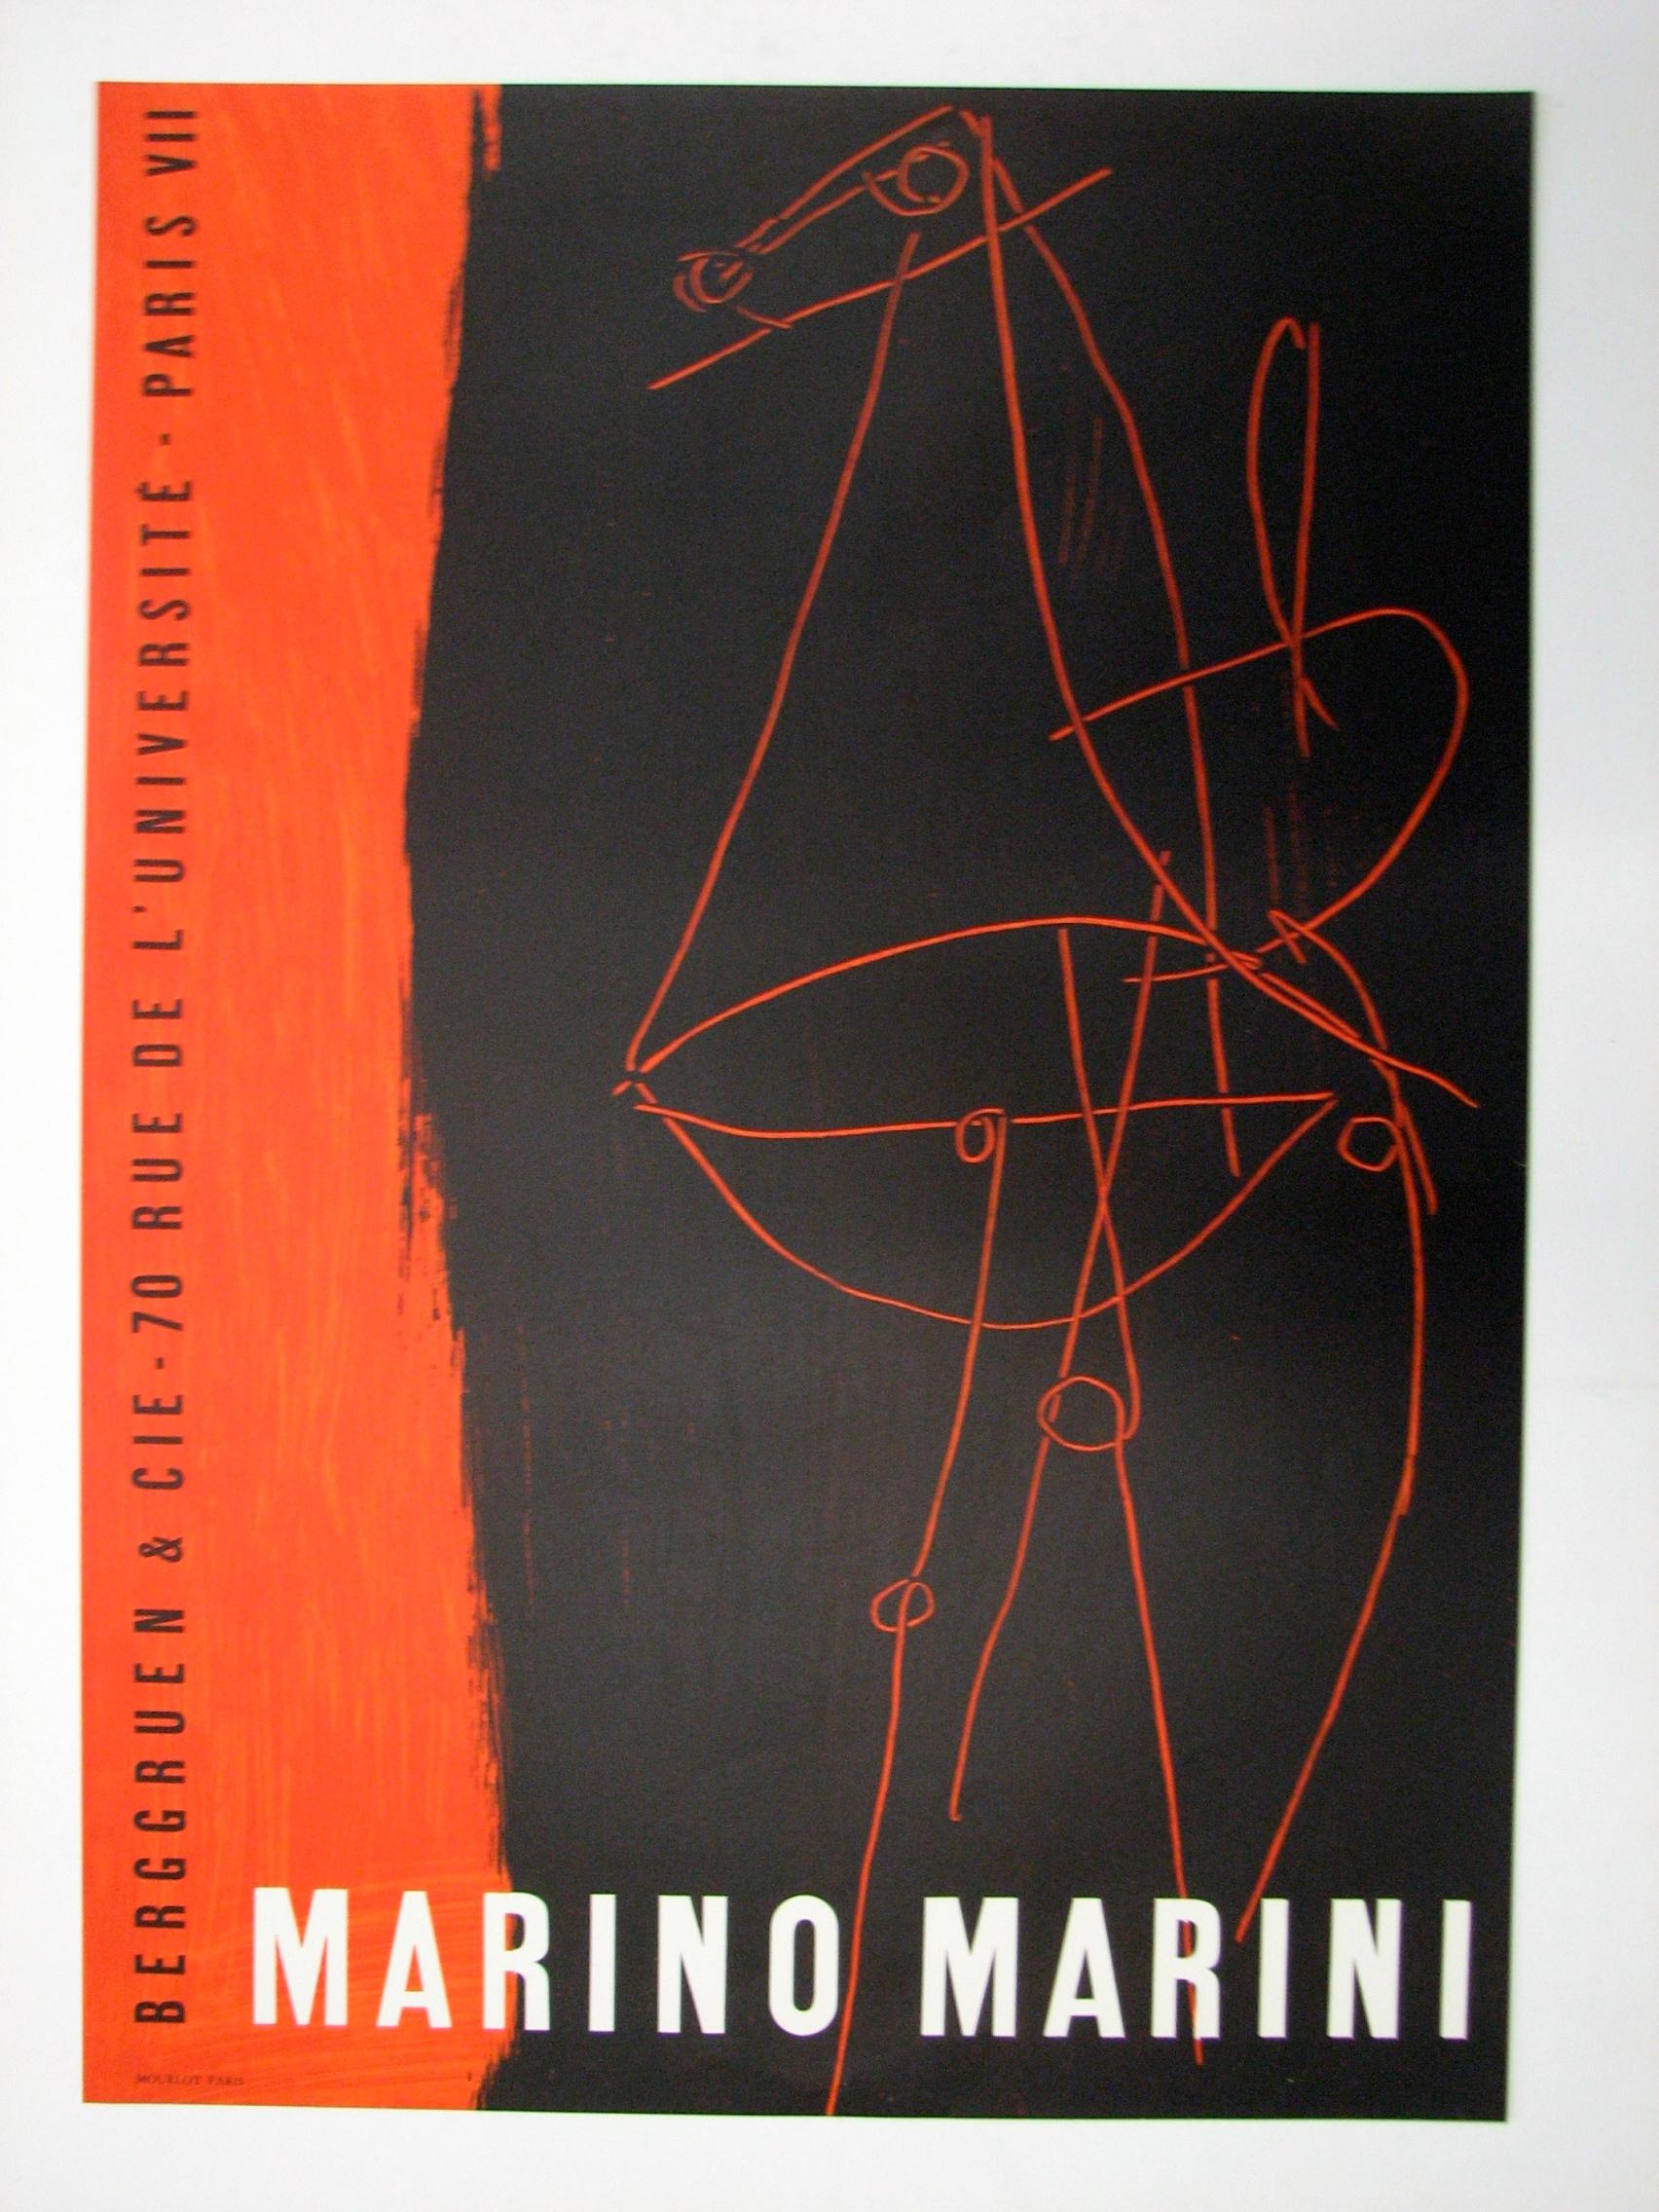 A beautiful original lithographic poster created for an exhibition of Marini's work at the Galerie Berggruen & Cie. Paris, 1955. There is also an edition of 200 unsigned and unnumbered proofs and a further 20 Artist proofs aside from the